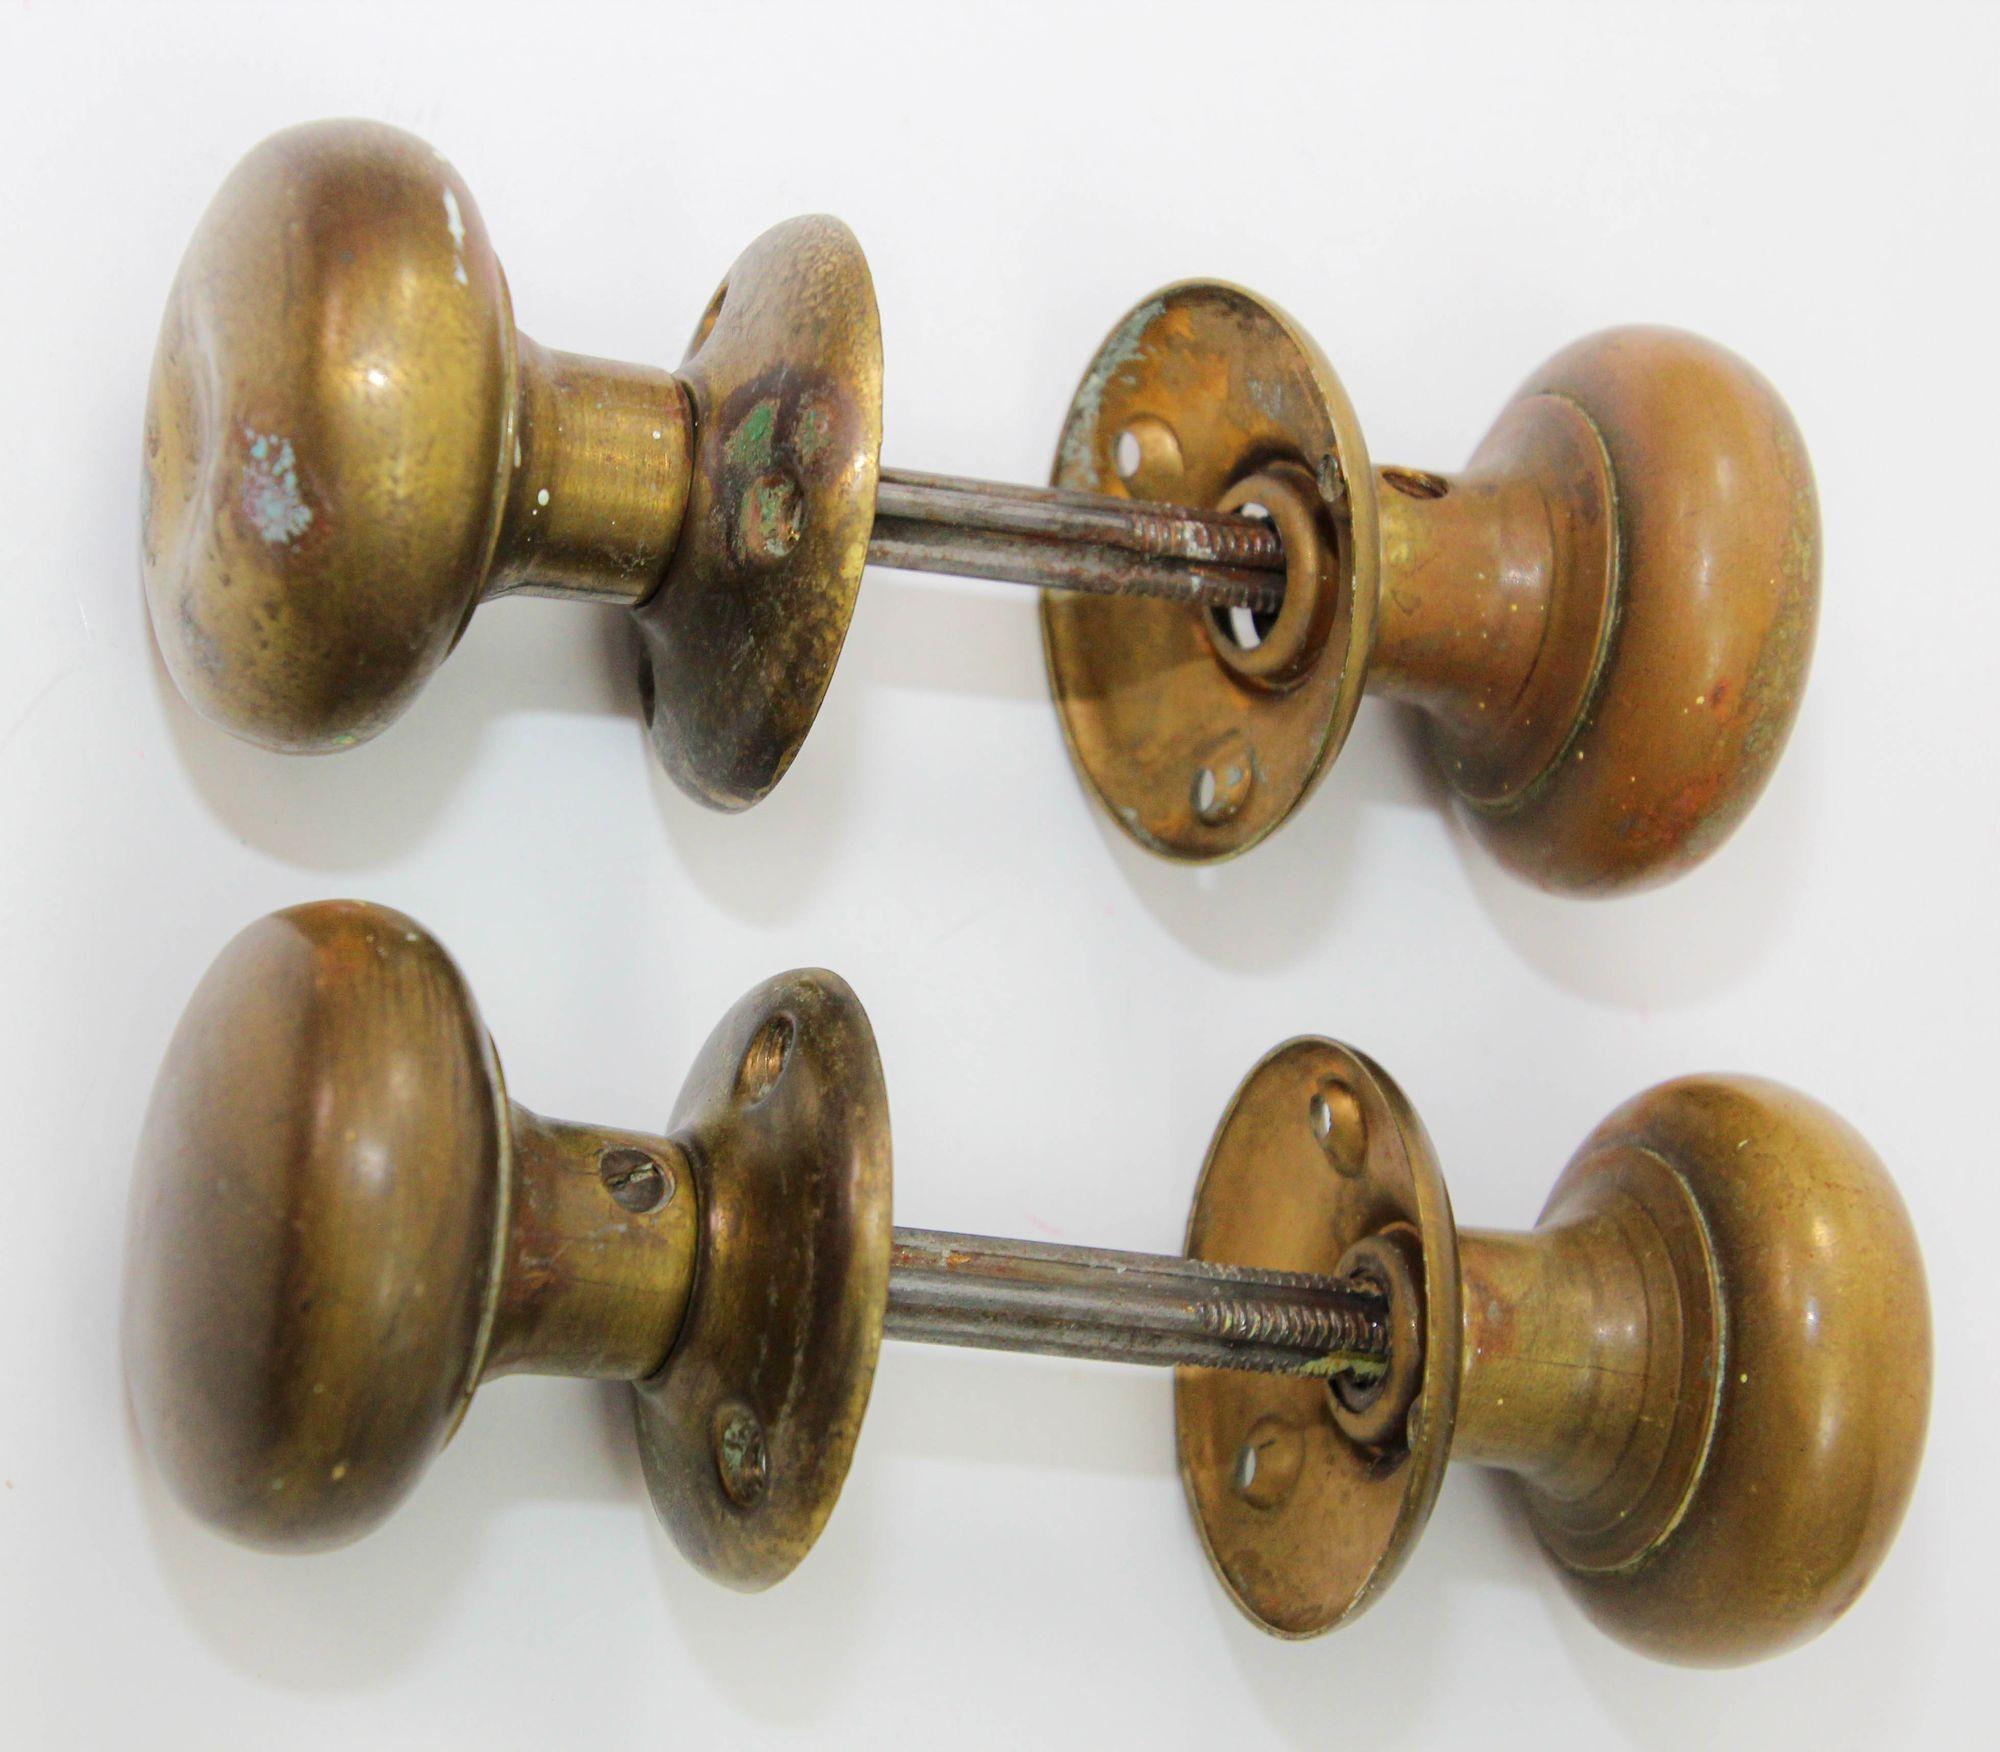 Antique Brass Round Passage Door Knobs Set of 2 England 1920s In Fair Condition For Sale In North Hollywood, CA